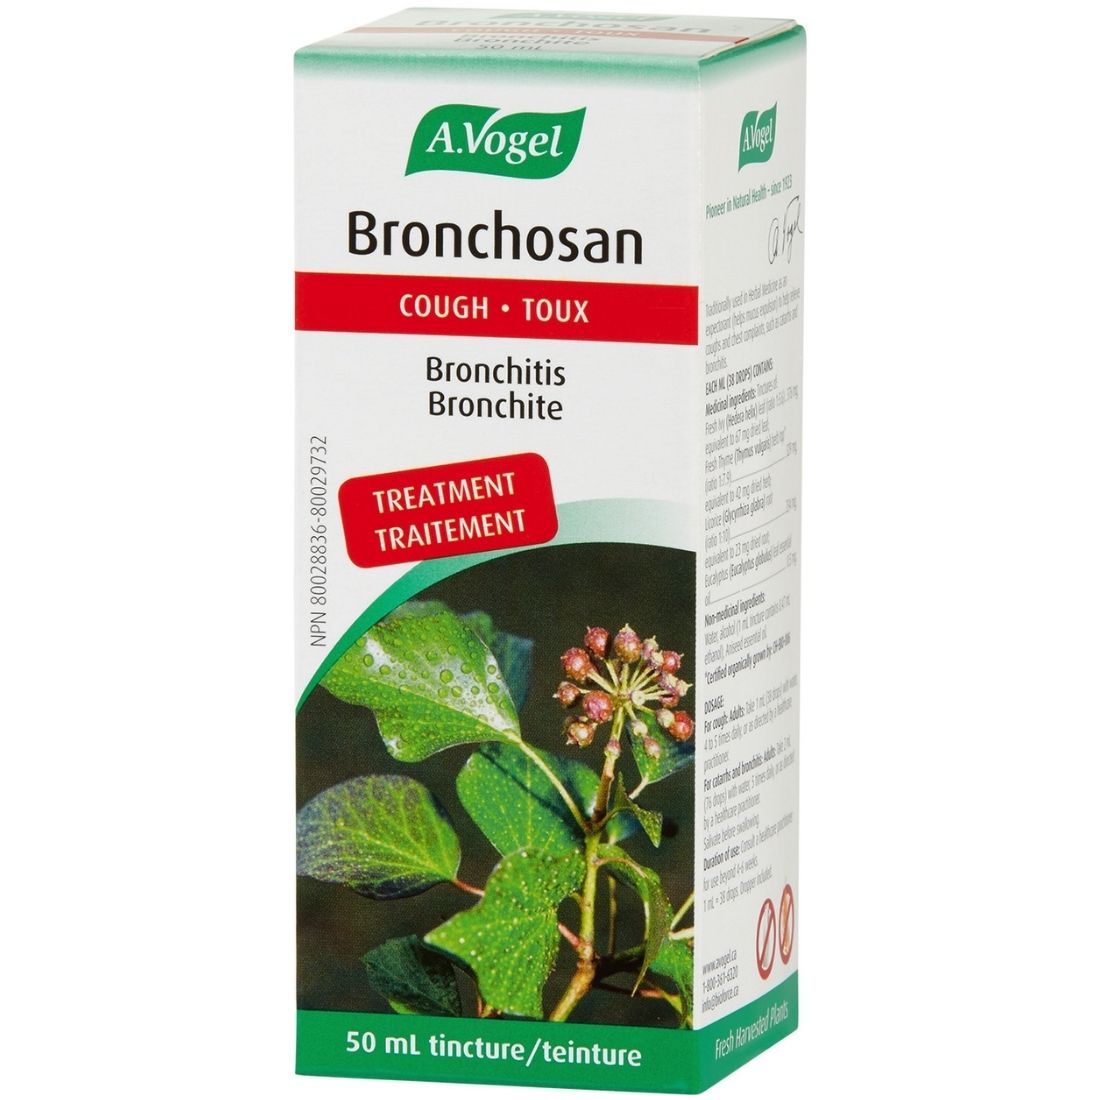 A. Vogel Bronchosan, Reduces cough and helps expel mucus, 50ml